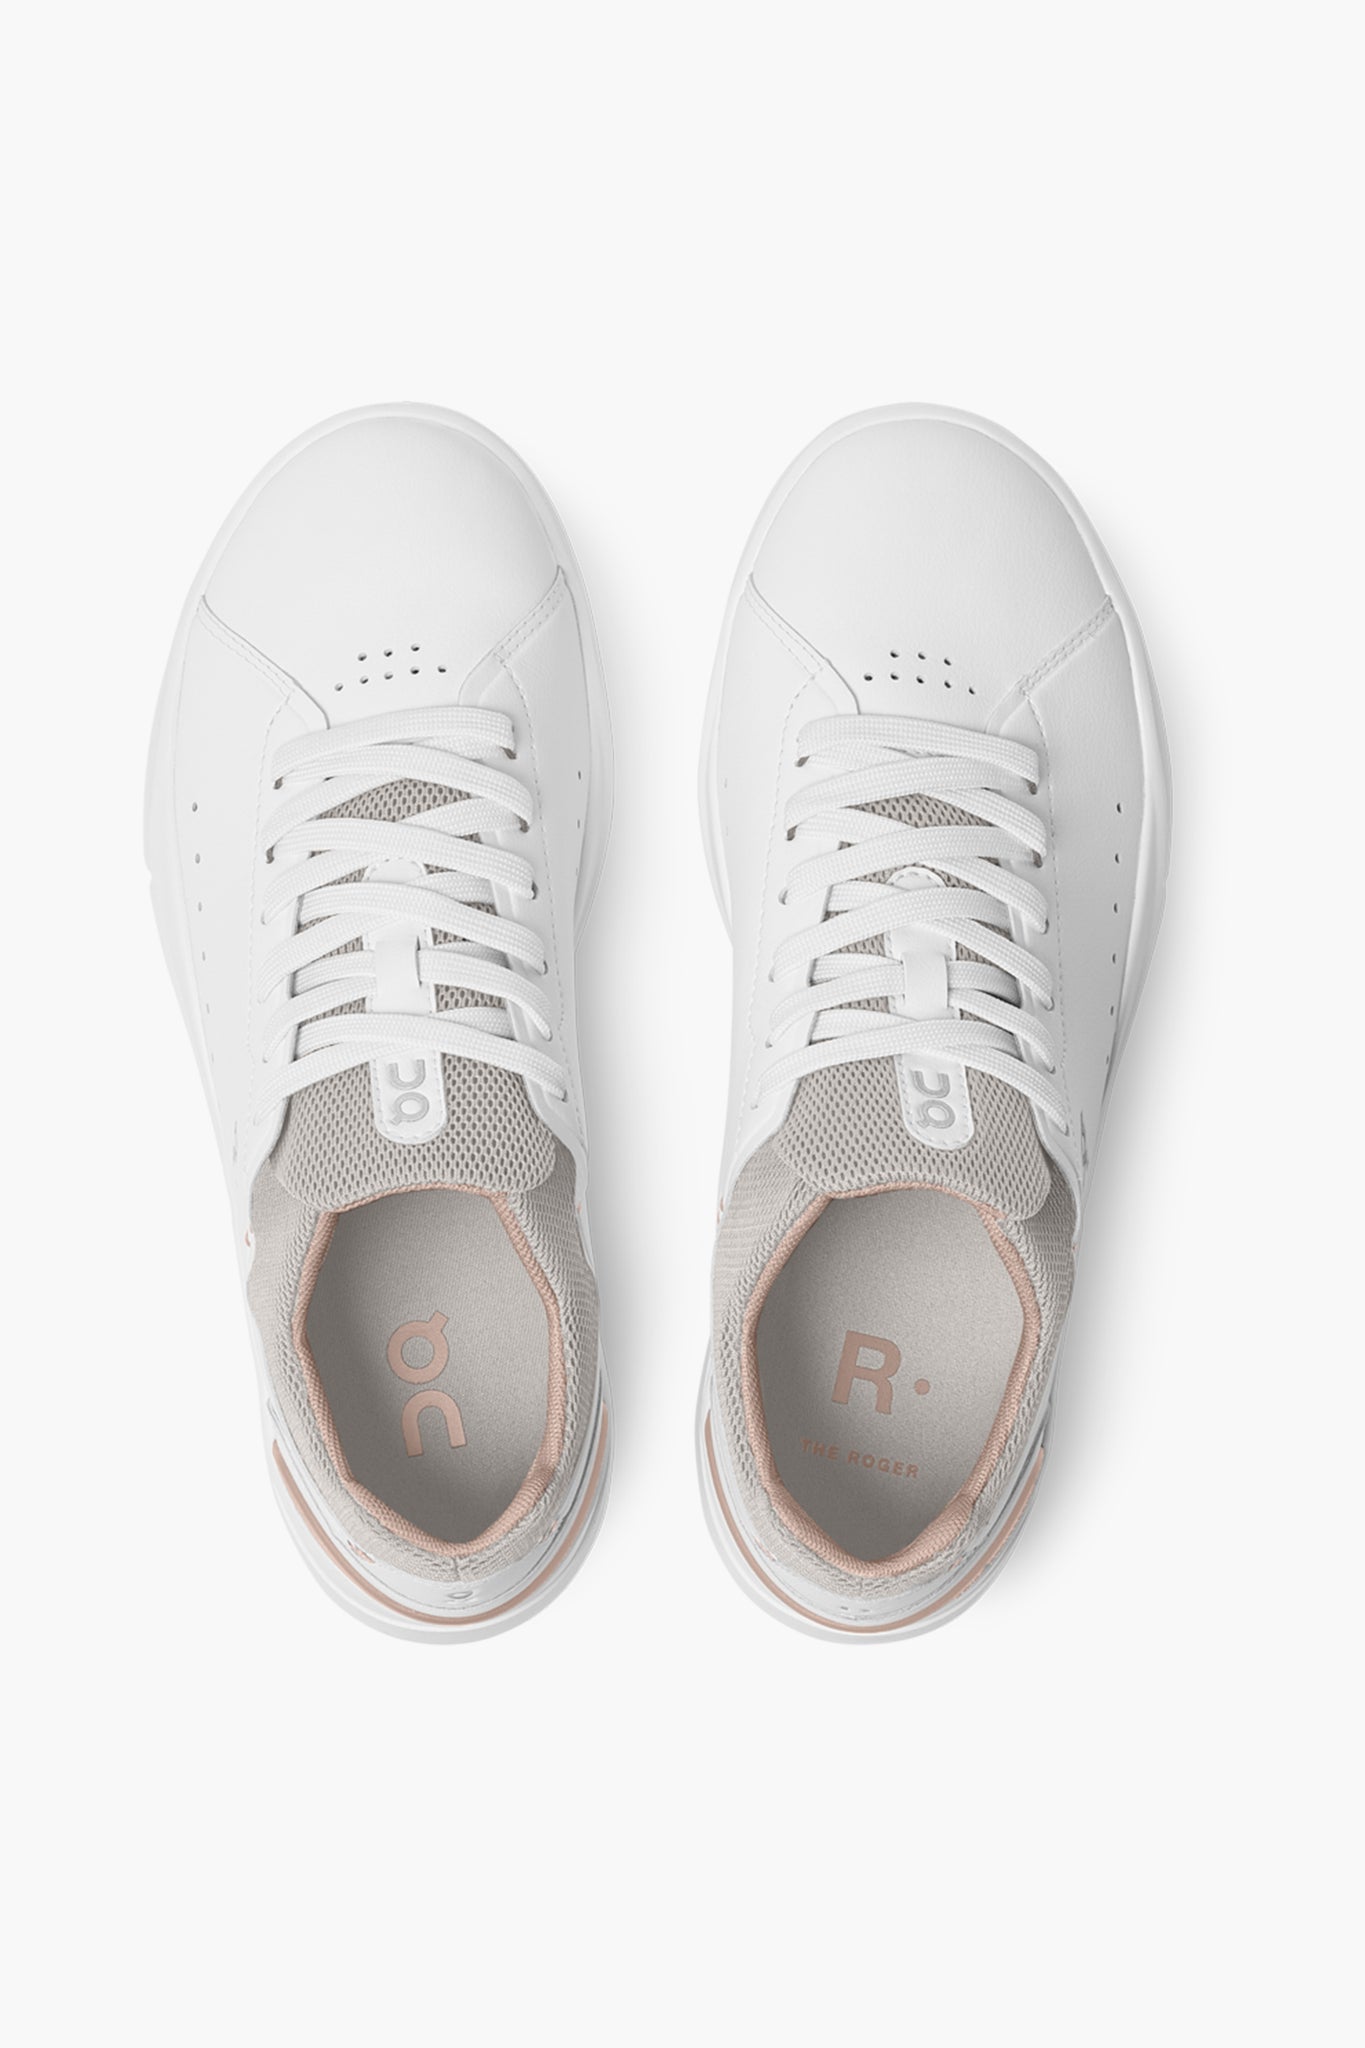 ON | Women's The Roger Advantage in White/Rose